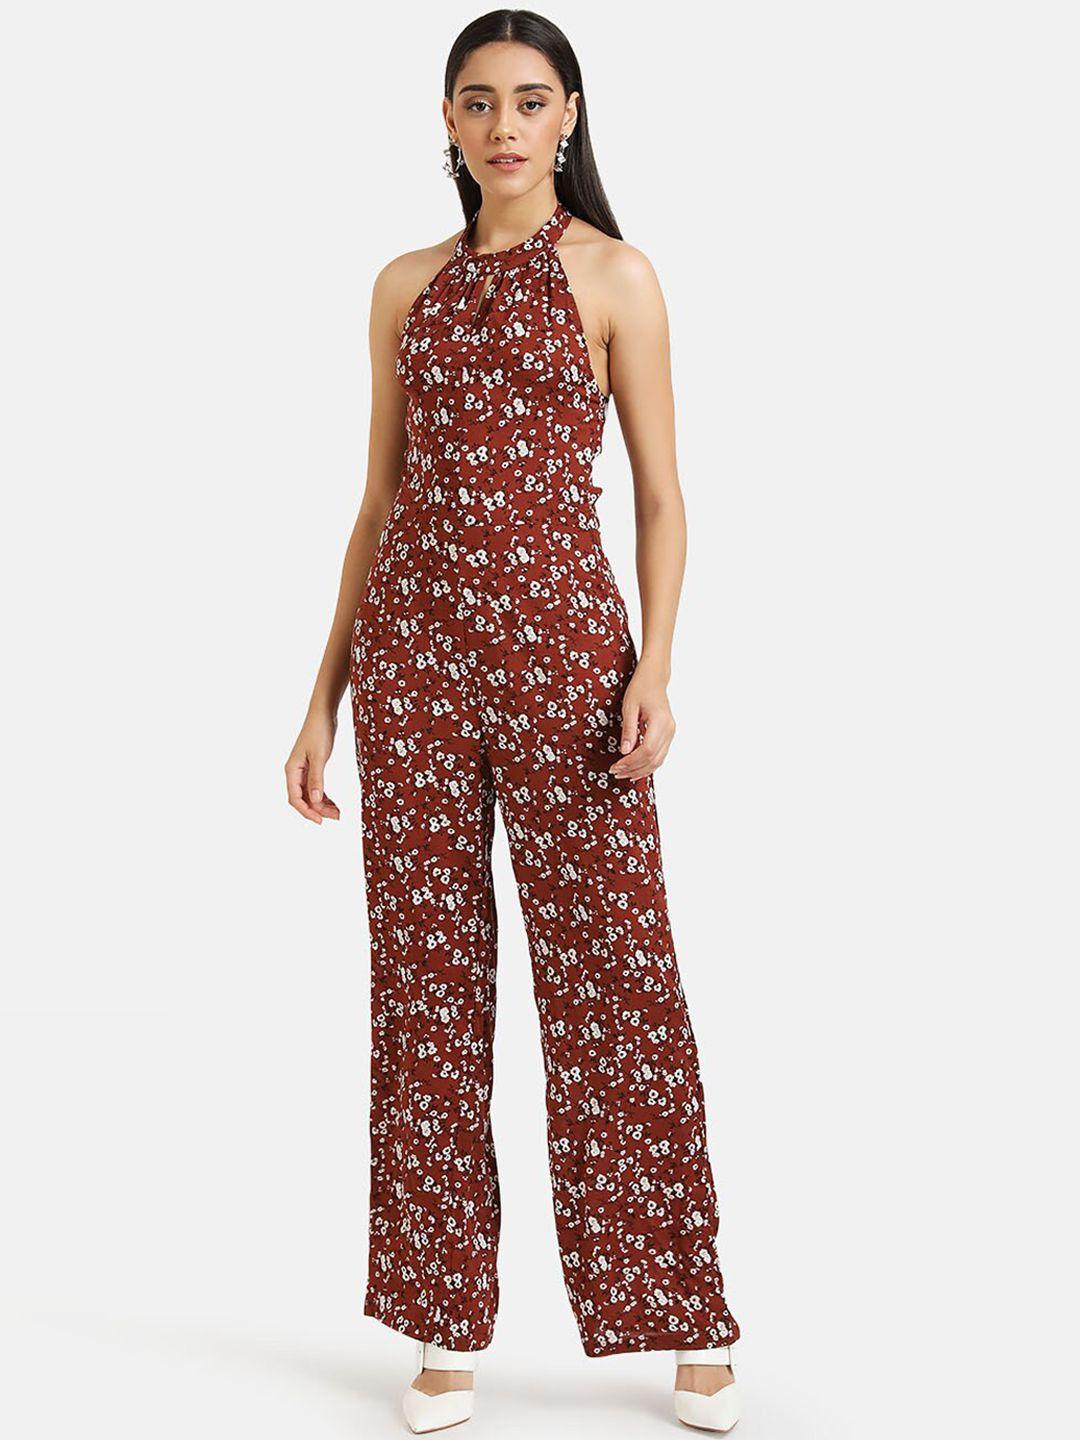 kazo women brown & off-white floral printed basic jumpsuit